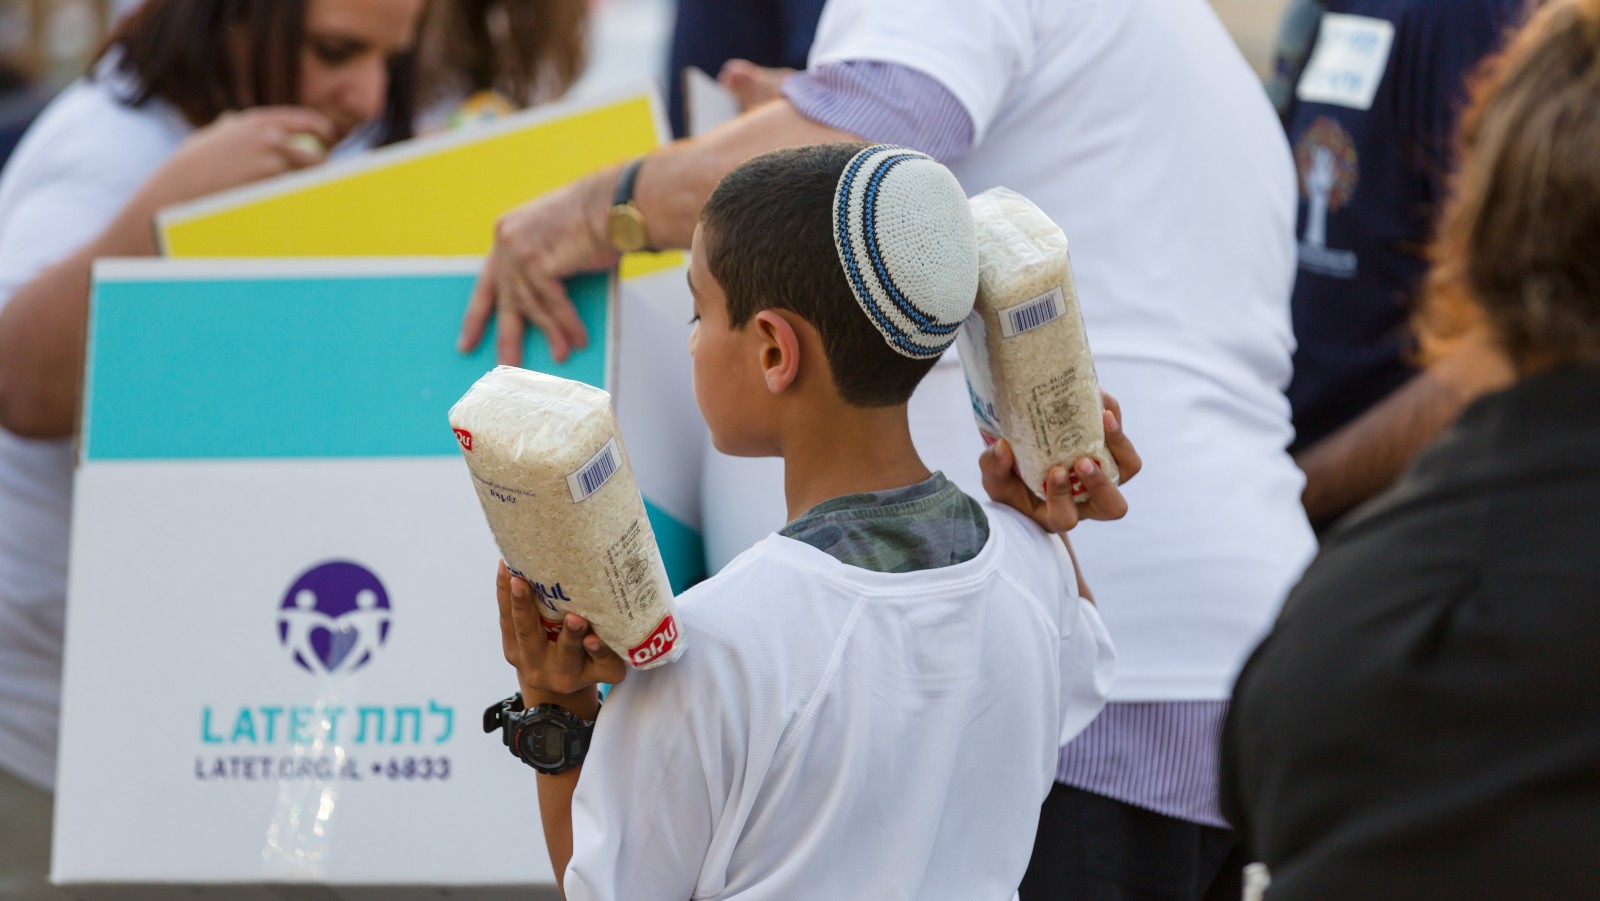 Latet volunteers packing emergency provisions for the needy during the Covid lockdown in Israel, April 2020. Photo: courtesy